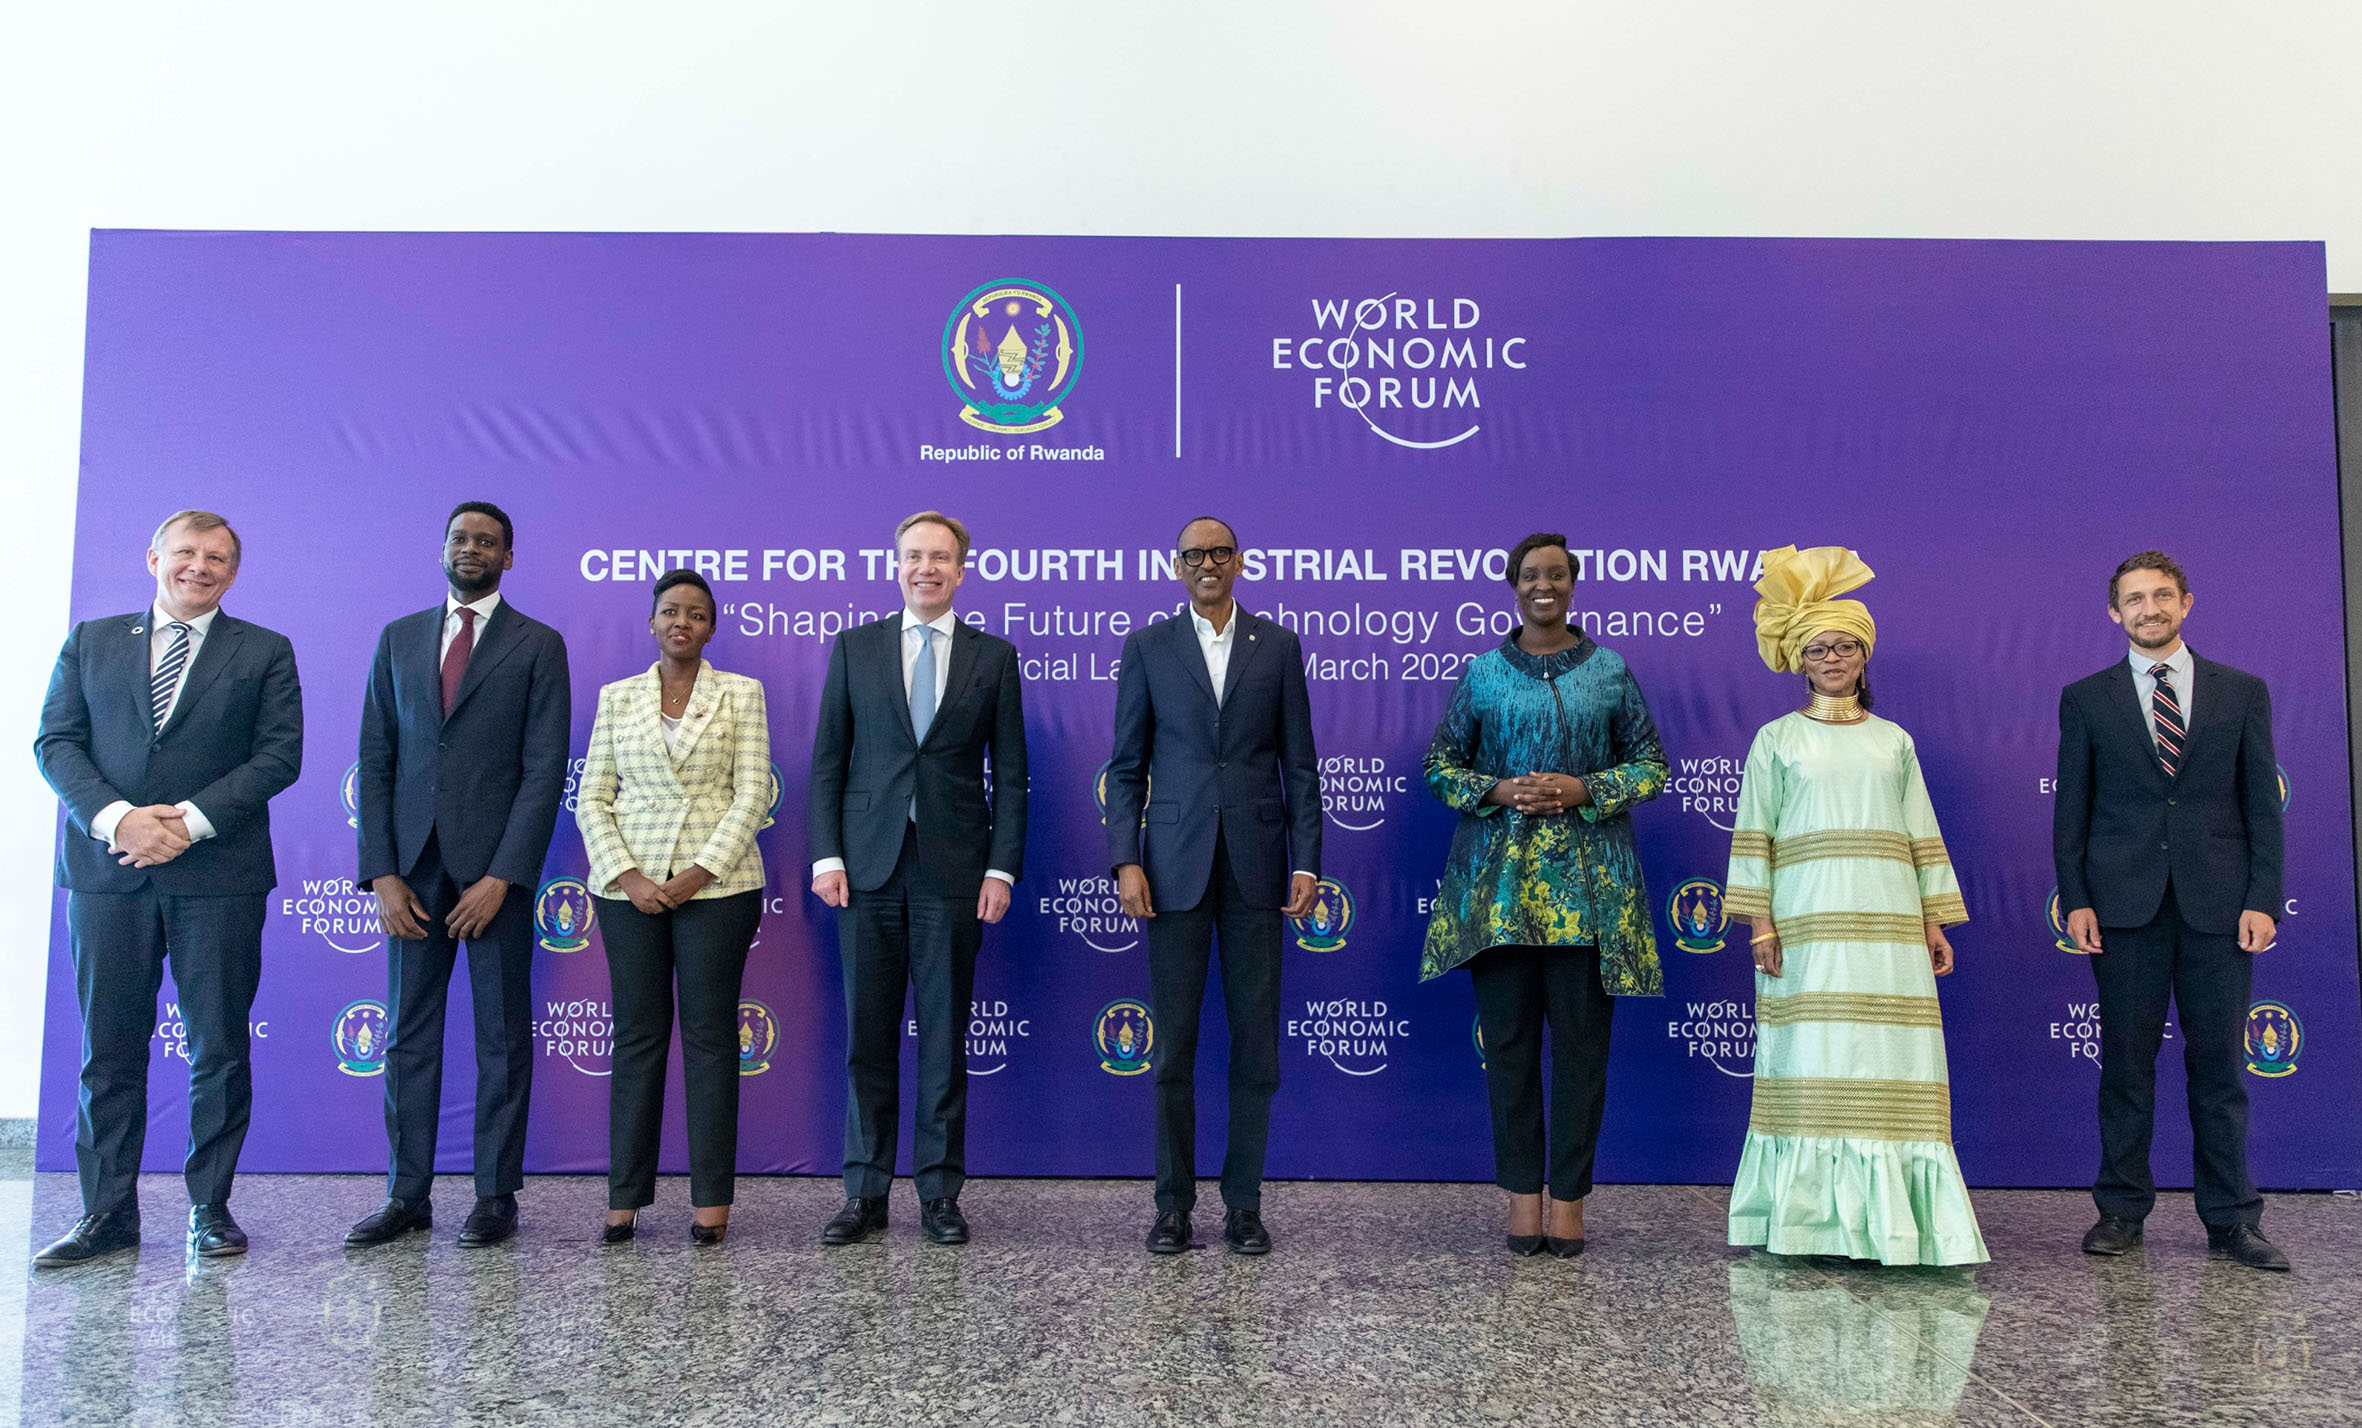 President Kagame and other officials pose for a picture at Kigali Convention Centre where the Centre for the Fourth Industrial Revolution was launched.